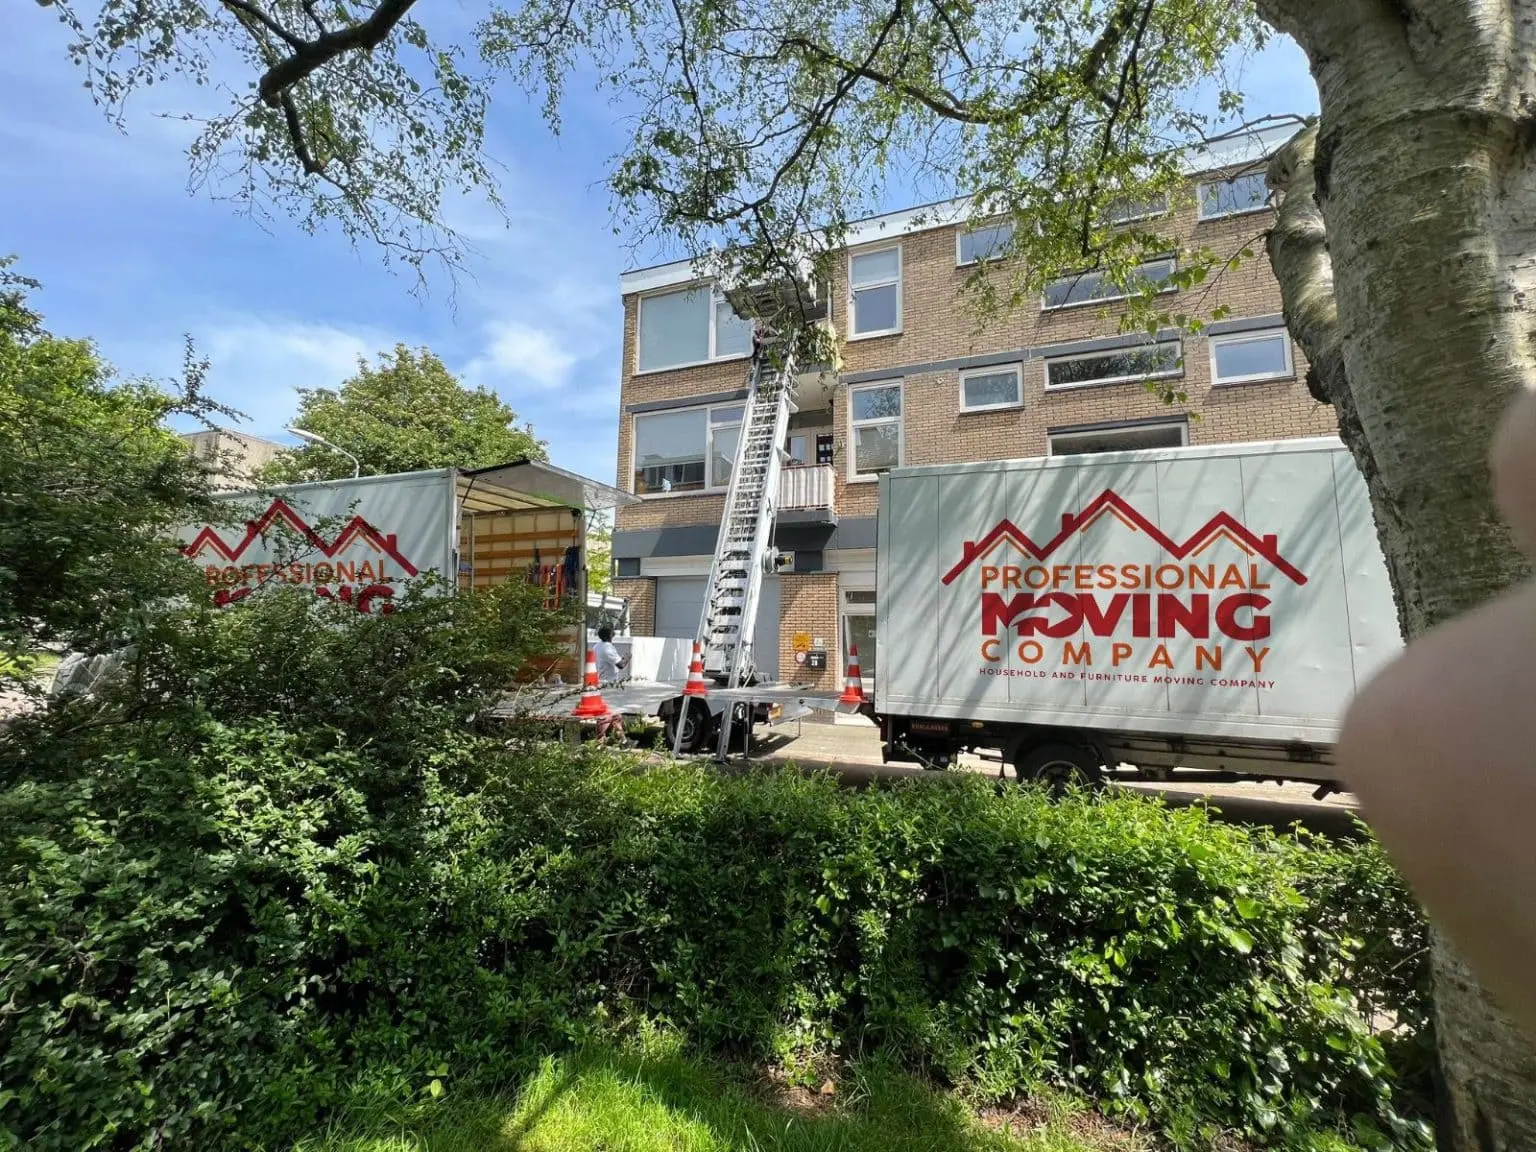 Moving Company Oegstgeest - Your Comprehensive Moving Solutions in Oegstgeest